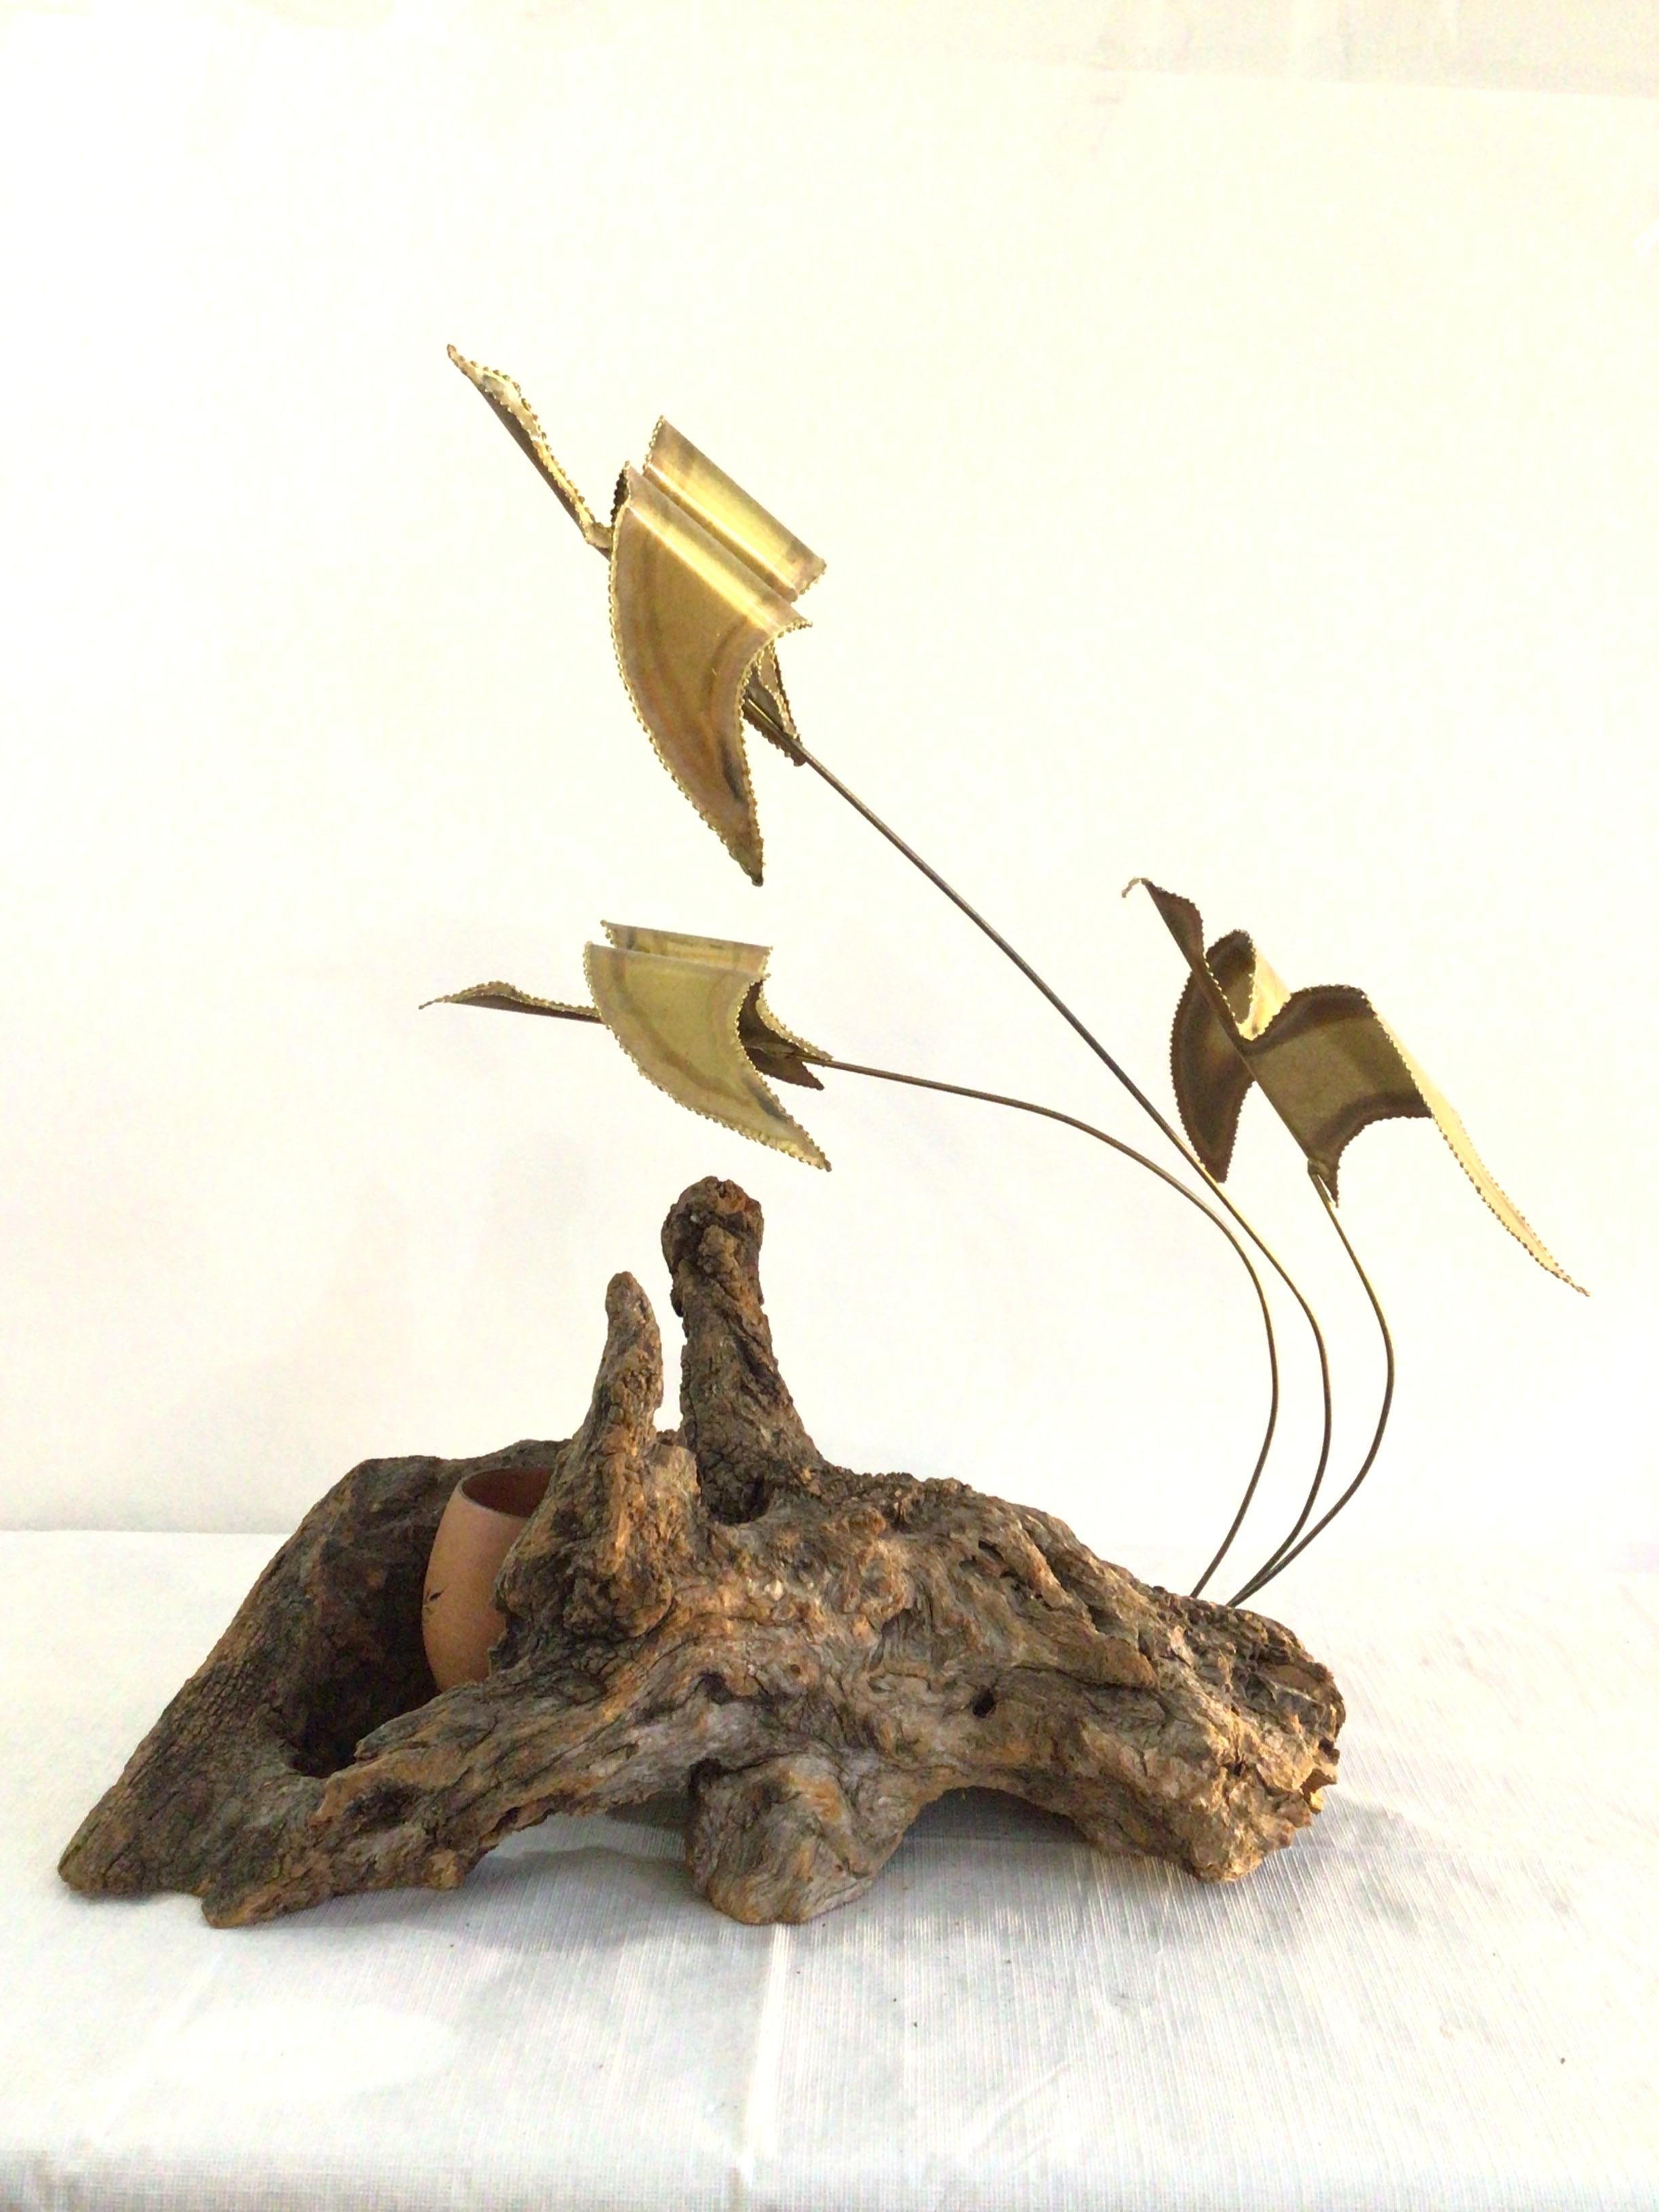 1960s Sheeted Brass Geese In Flight Sculpture On Driftwood Base
Wood Pot has signature Weber '86 could be used for a potted plant to add greenery to this spirited sculpture
Geese sculptures are all attached - not removable.